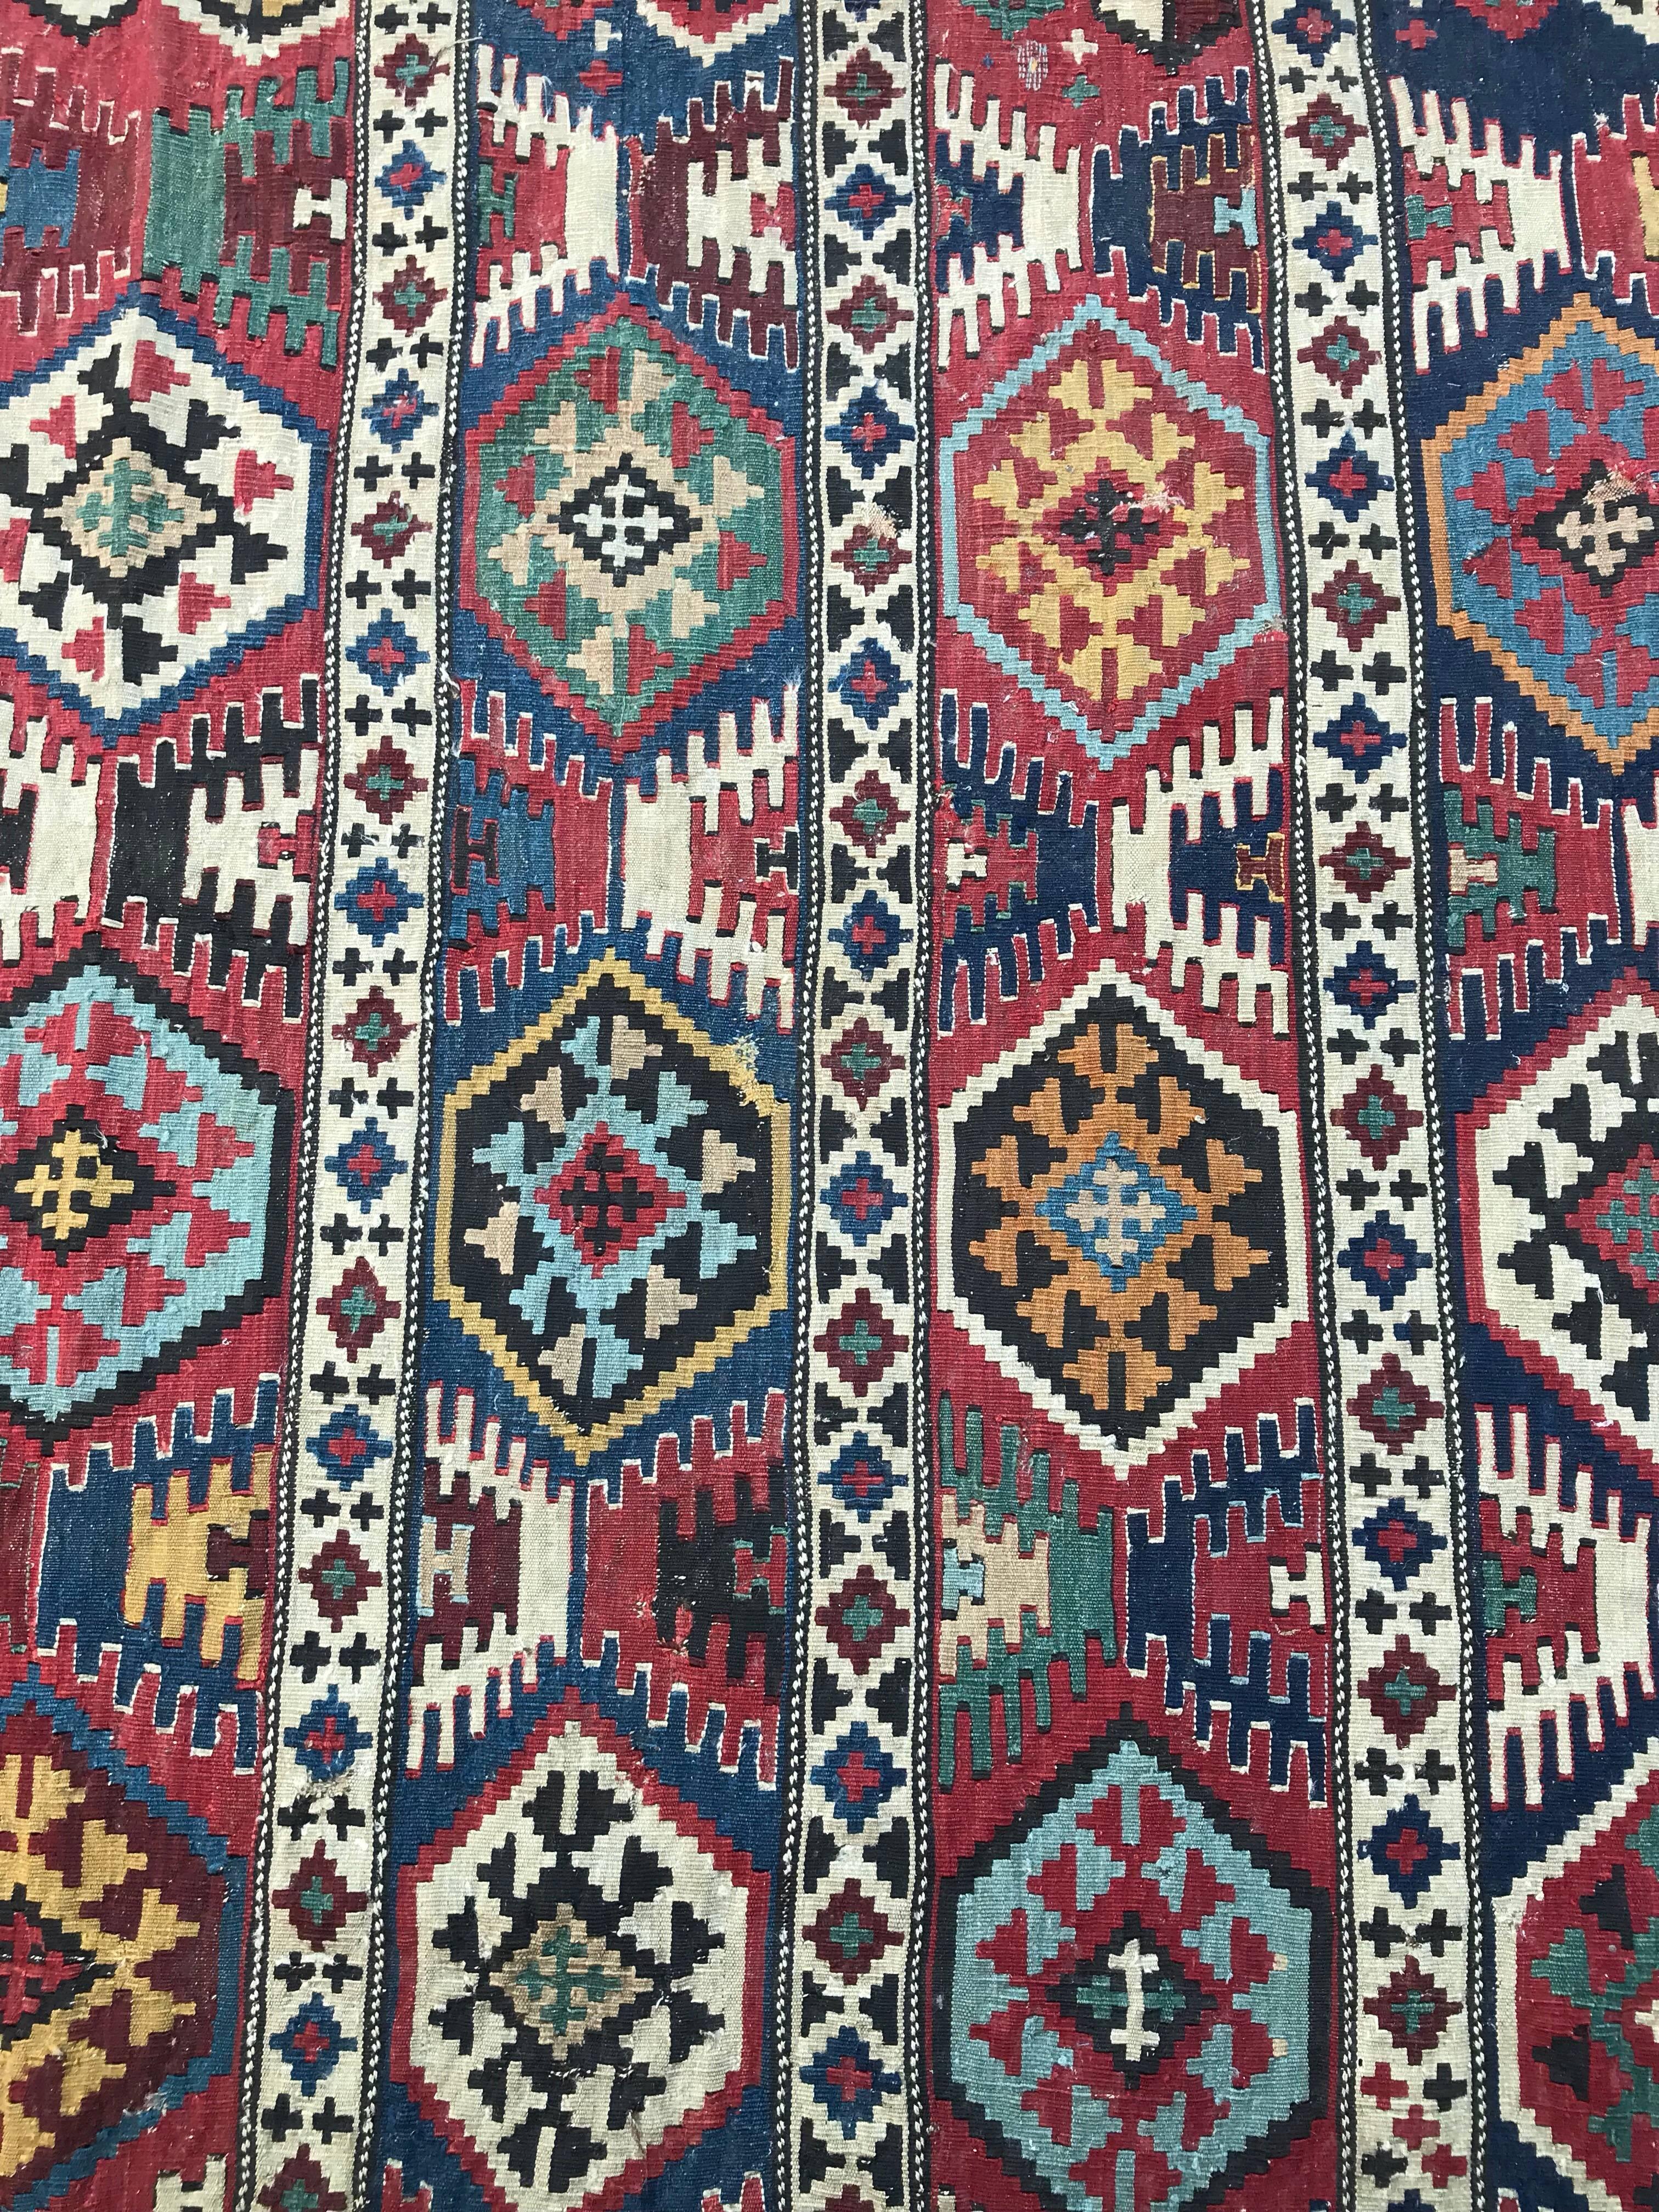 Very beautiful antique Kilim from Caucasus with nice natural colors with blue green, orange and red, and geometrical tribal design. A collectible piece, entirely handwoven with wool on wool foundation.

✨✨✨
